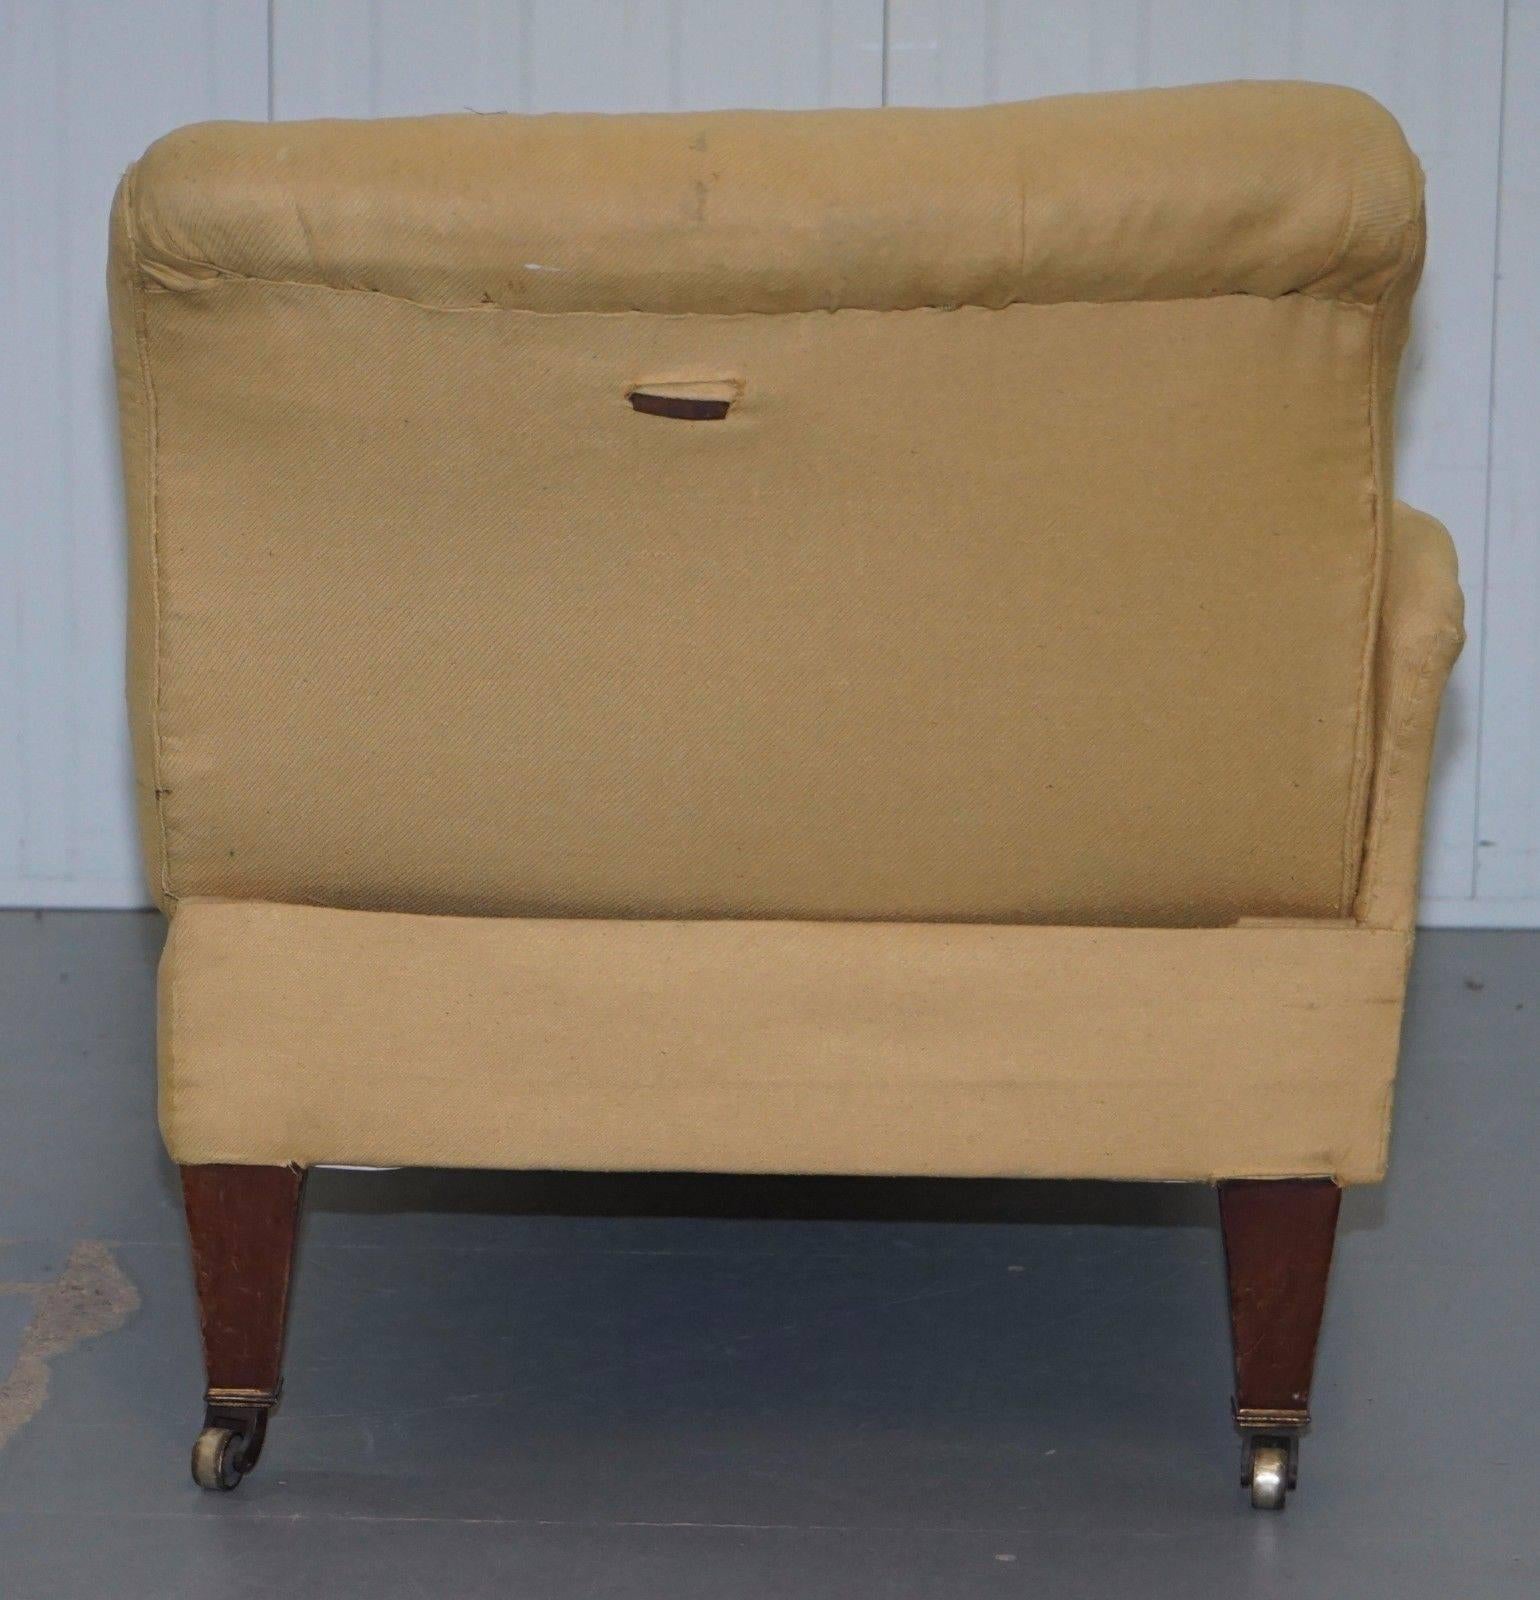 British Original Period Howard & Sons Fully Stamped with Castors Chaise Lounge Daybed